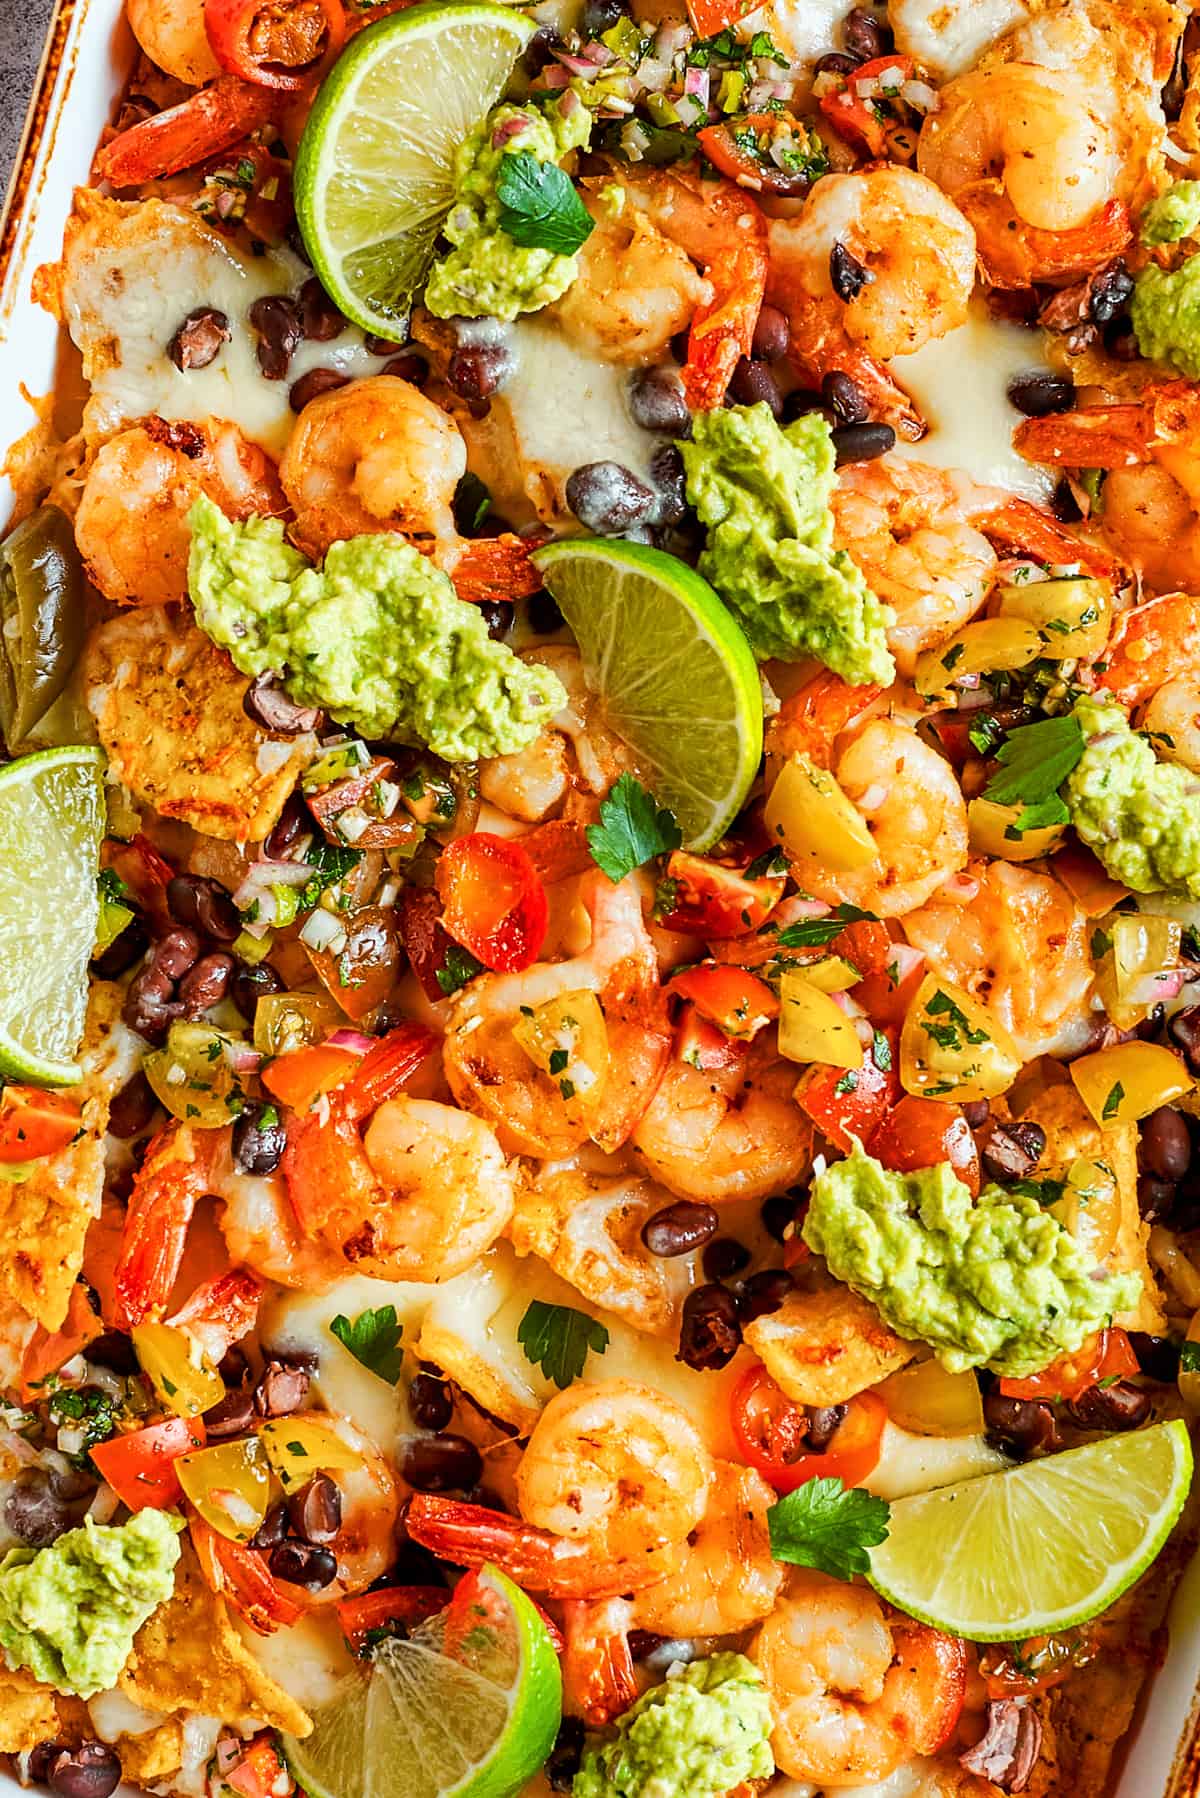 Tortilla chips topped with shrimp, cheese, black beans, tomatoes, and a garnish of guacamole and slices of lime.